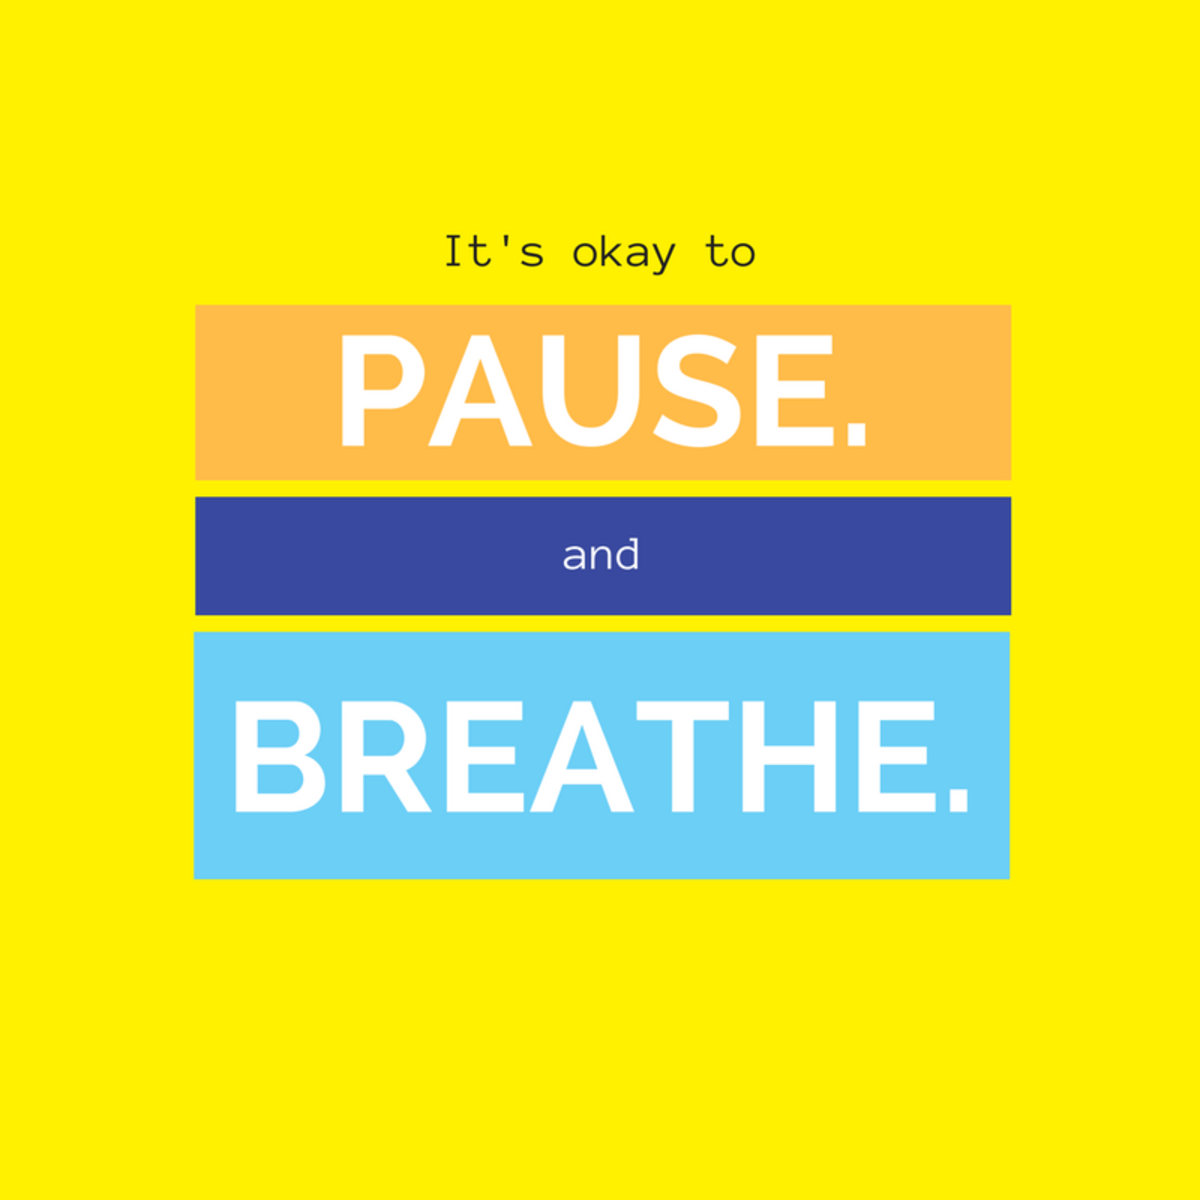 Pro kissing tip: It's okay to PAUSE and BREATHE!